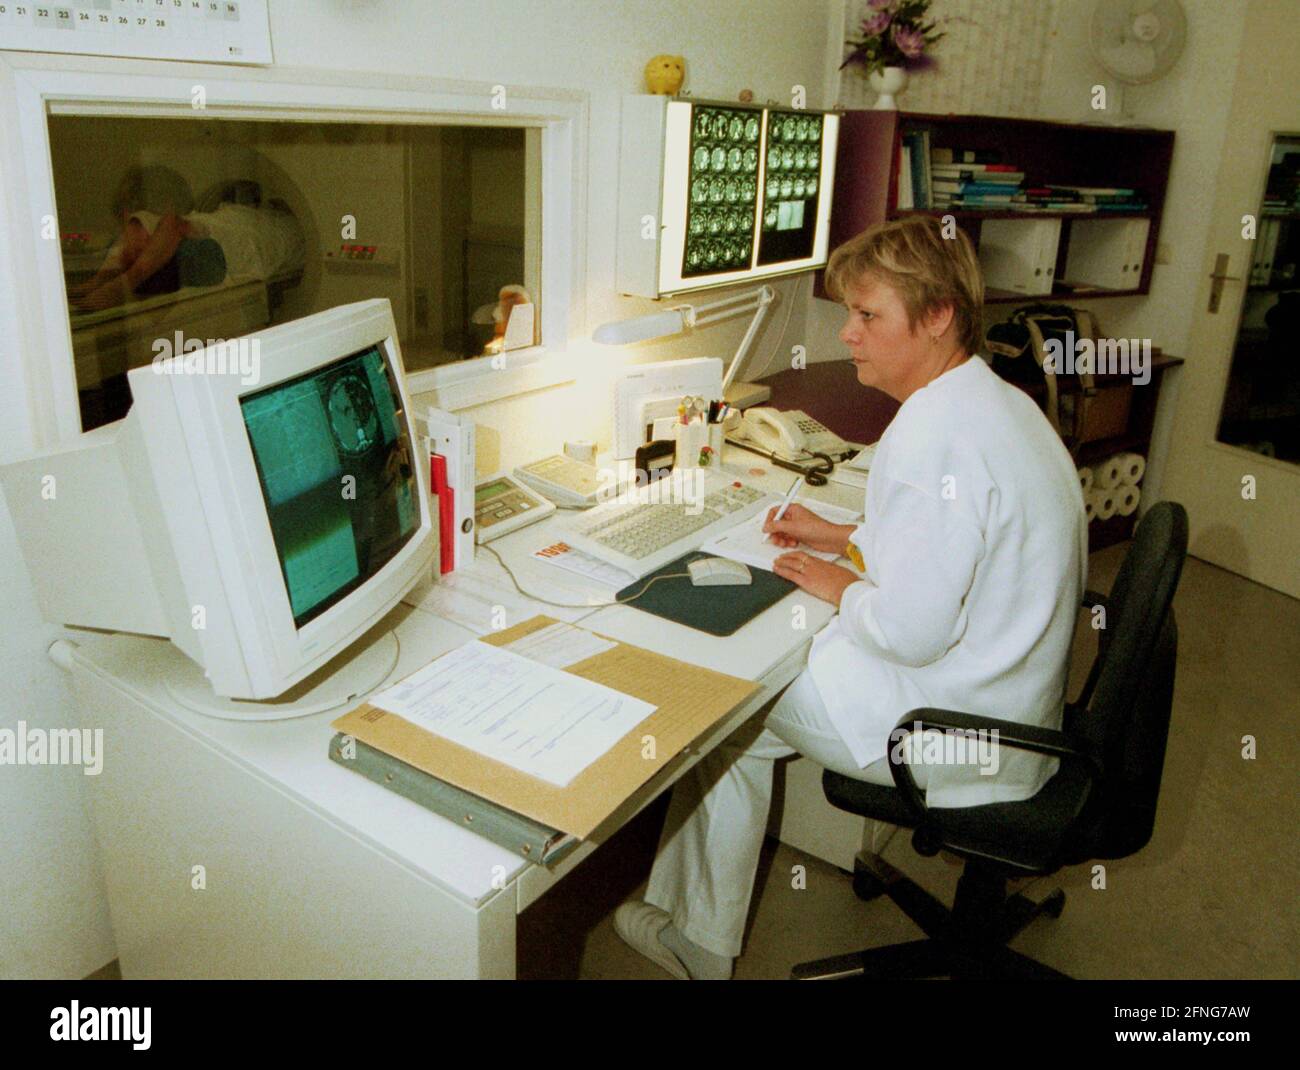 Berlin / Health / Hospitals / 1997 Hospital Prenzlauer Berg. Evaluation of the data of the computer tomograph, doctor / / women's work / hospital / Roentgen / diagnosis [automated translation] Stock Photo